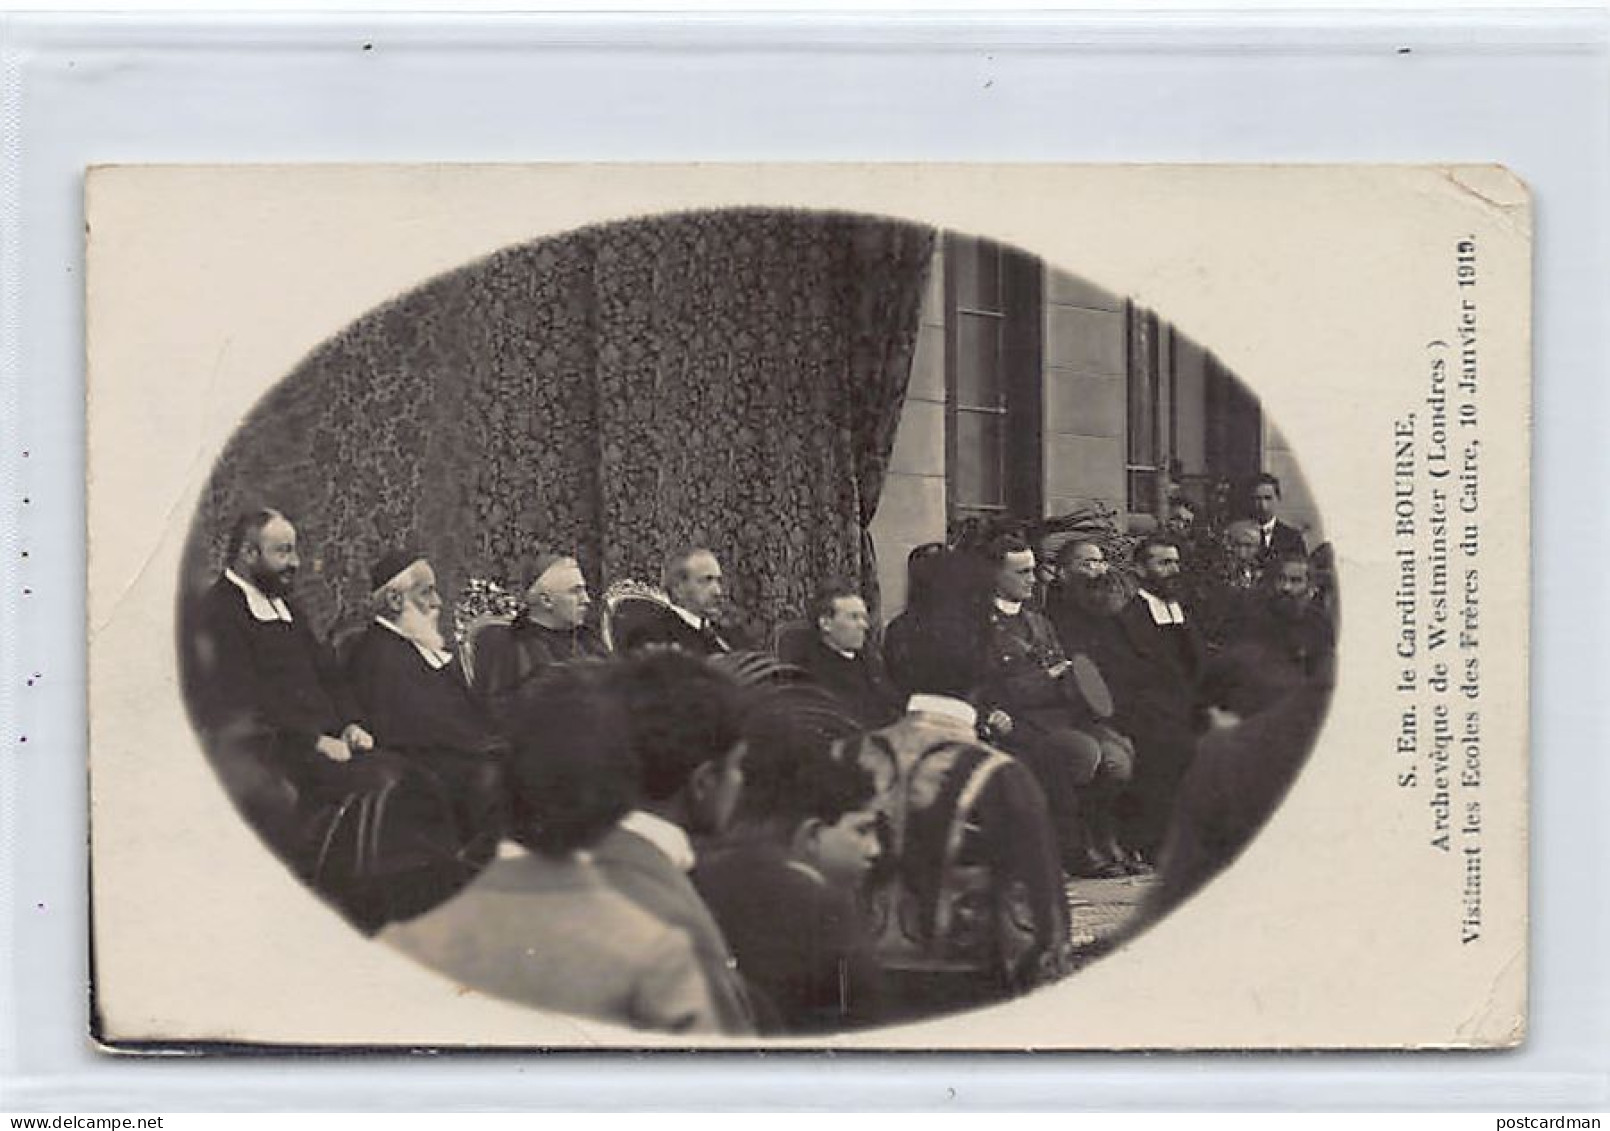 Egypt - CAIRO - H.E. Cardinal Bourne, Archbishop Of Westminster, Visiting The Ecole Des Frères, 10 January 1919 - REAL P - Cairo